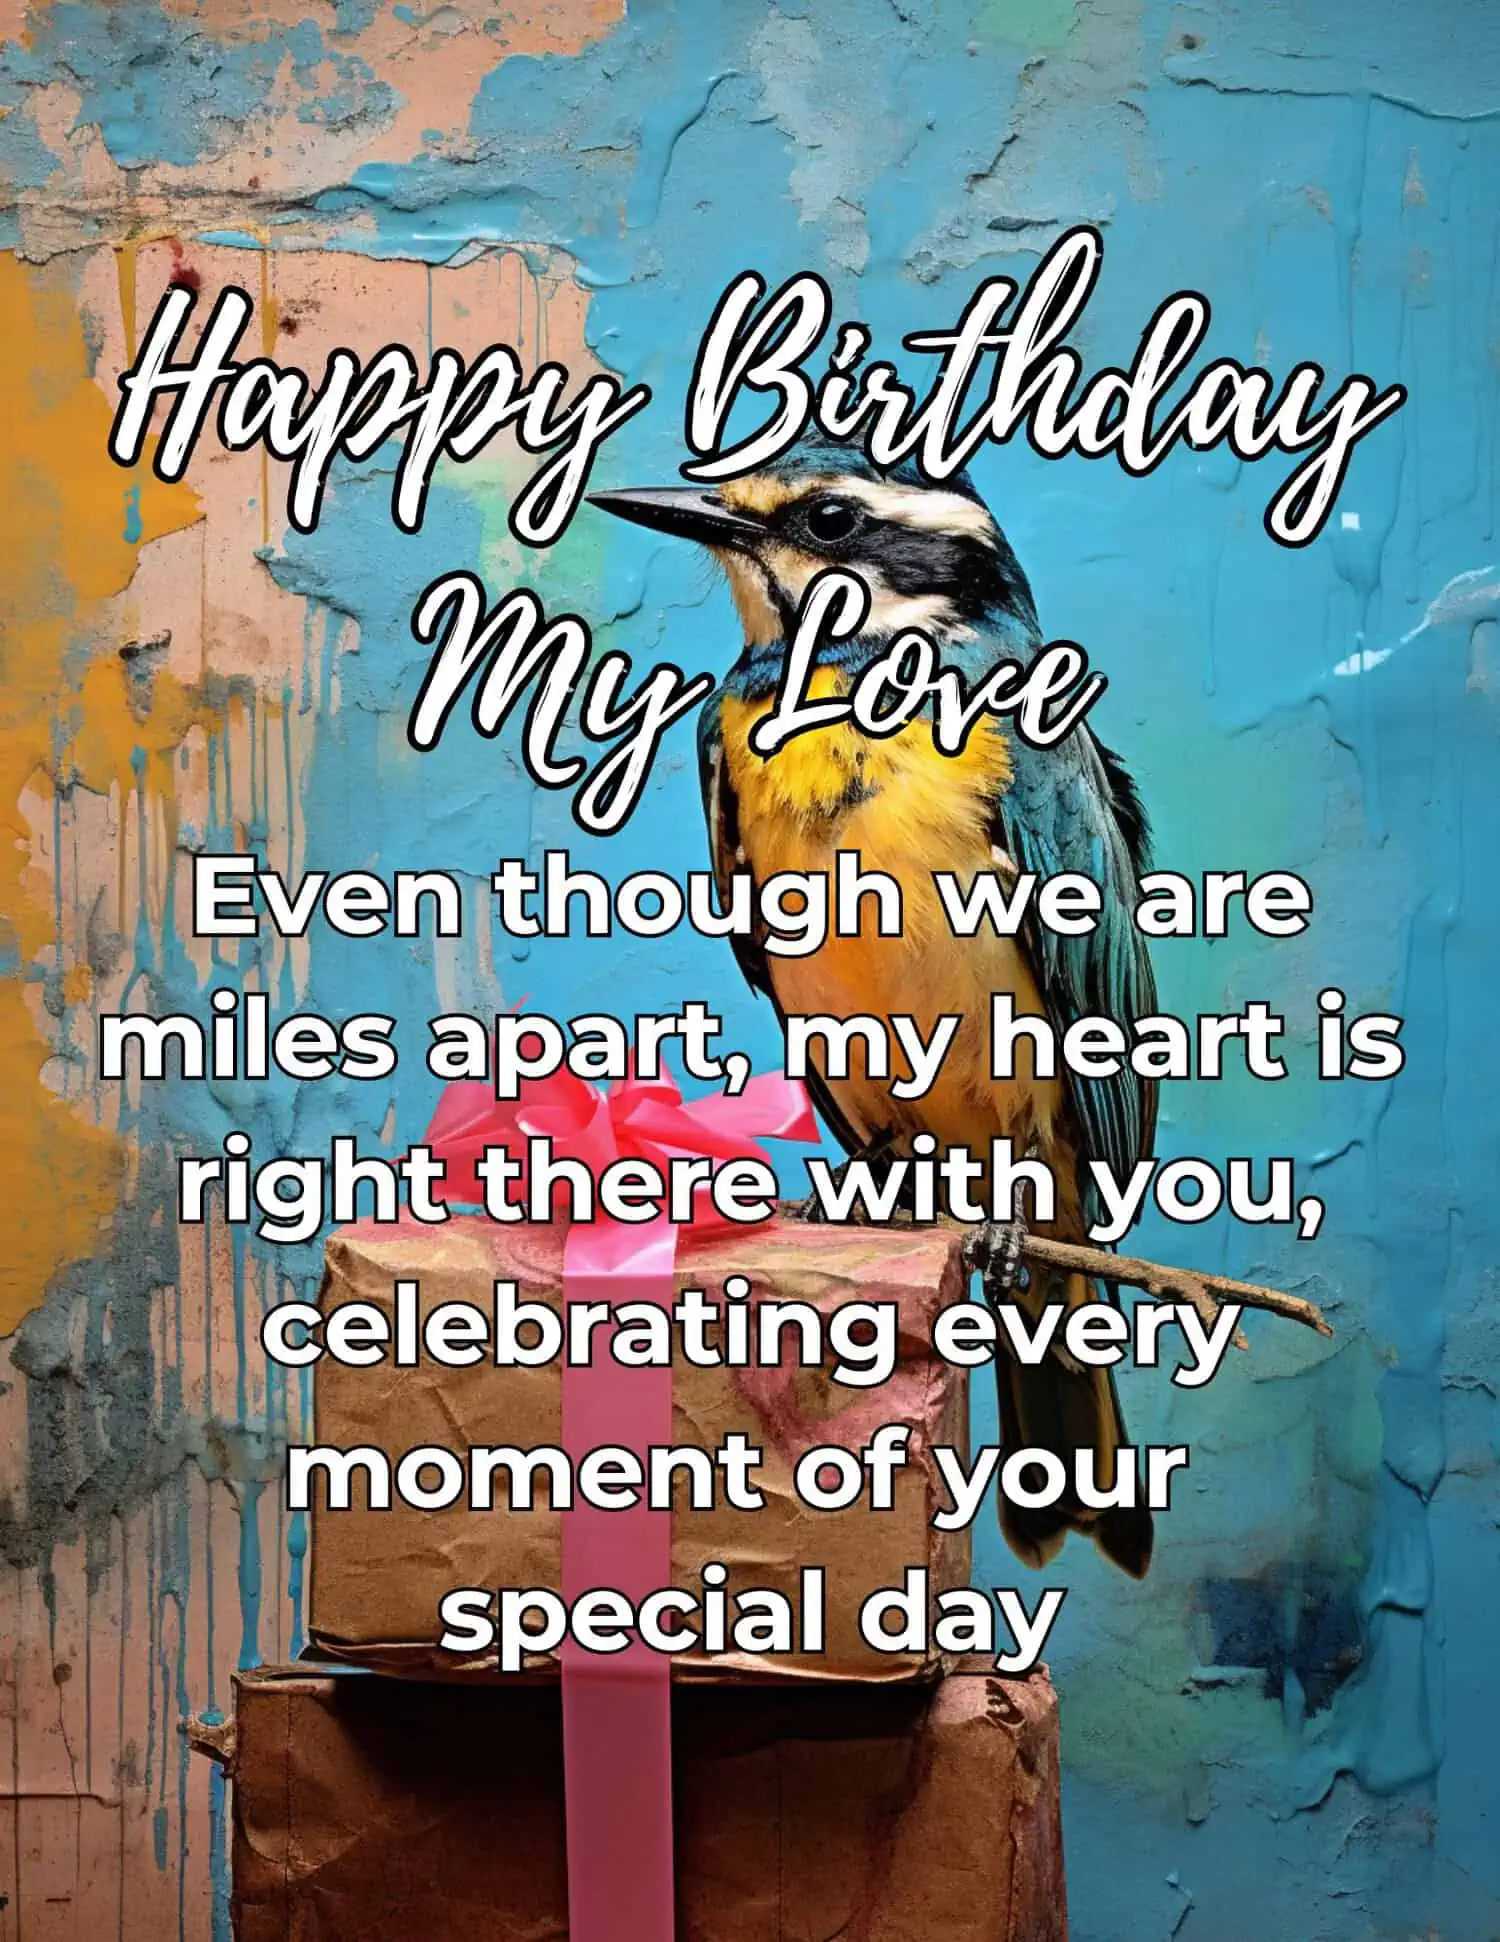 Heartwarming birthday wishes that convey love across the miles.